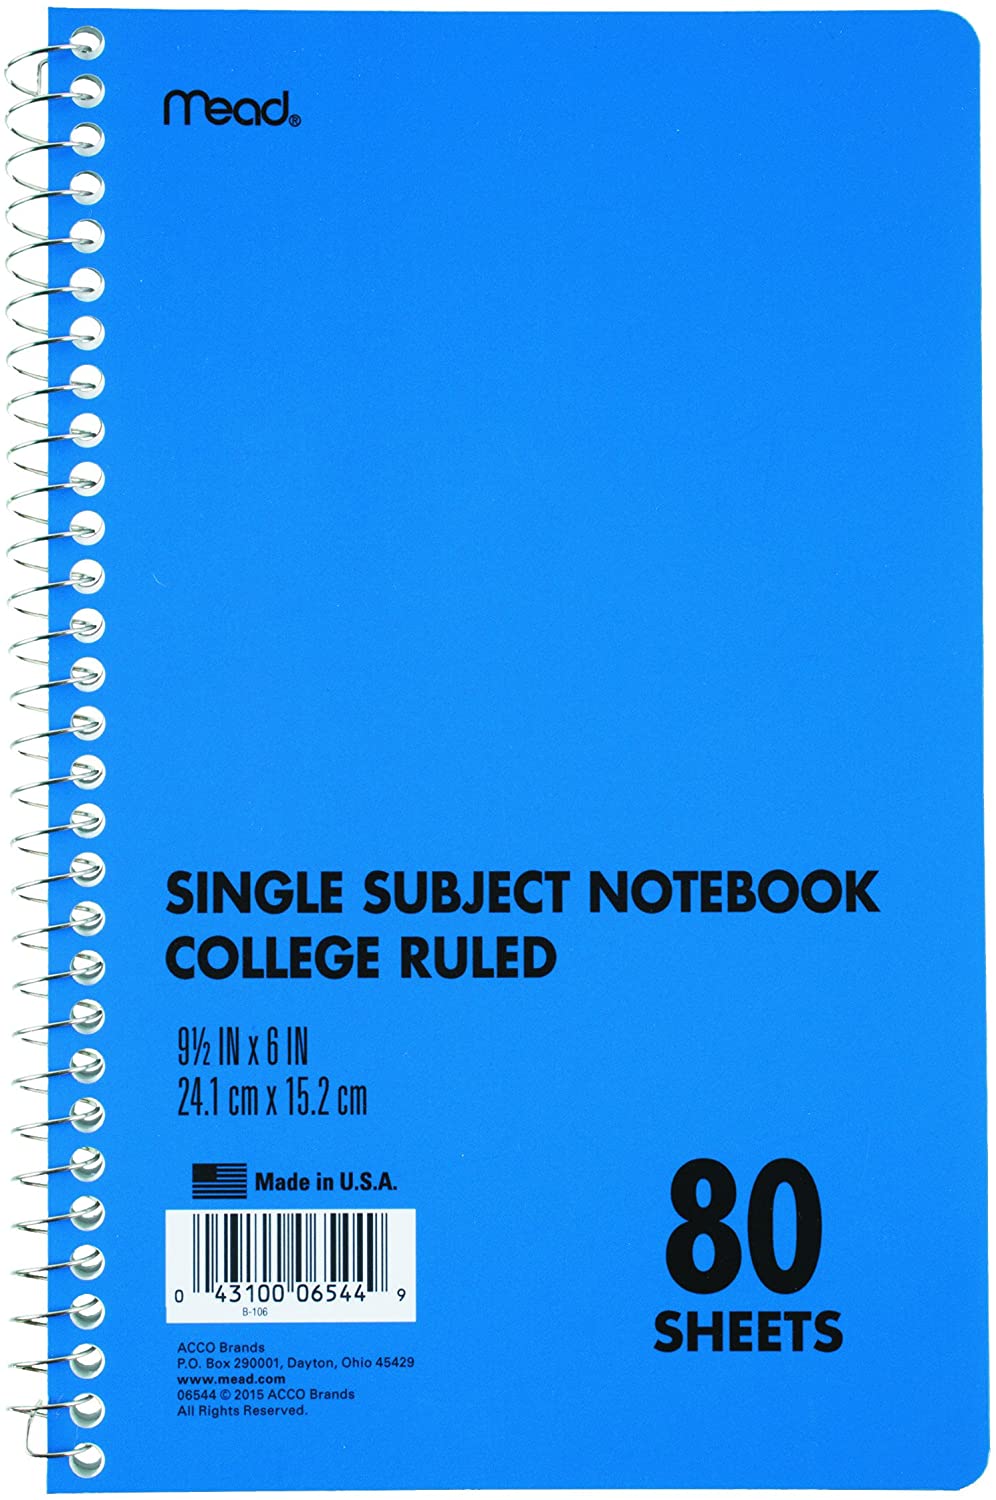 ''Mead Sprial Notebook, 1 Subject, College Ruled Paper, 80 SHEETS, 9-1/2'''' x 6'''', Blue (06544)''